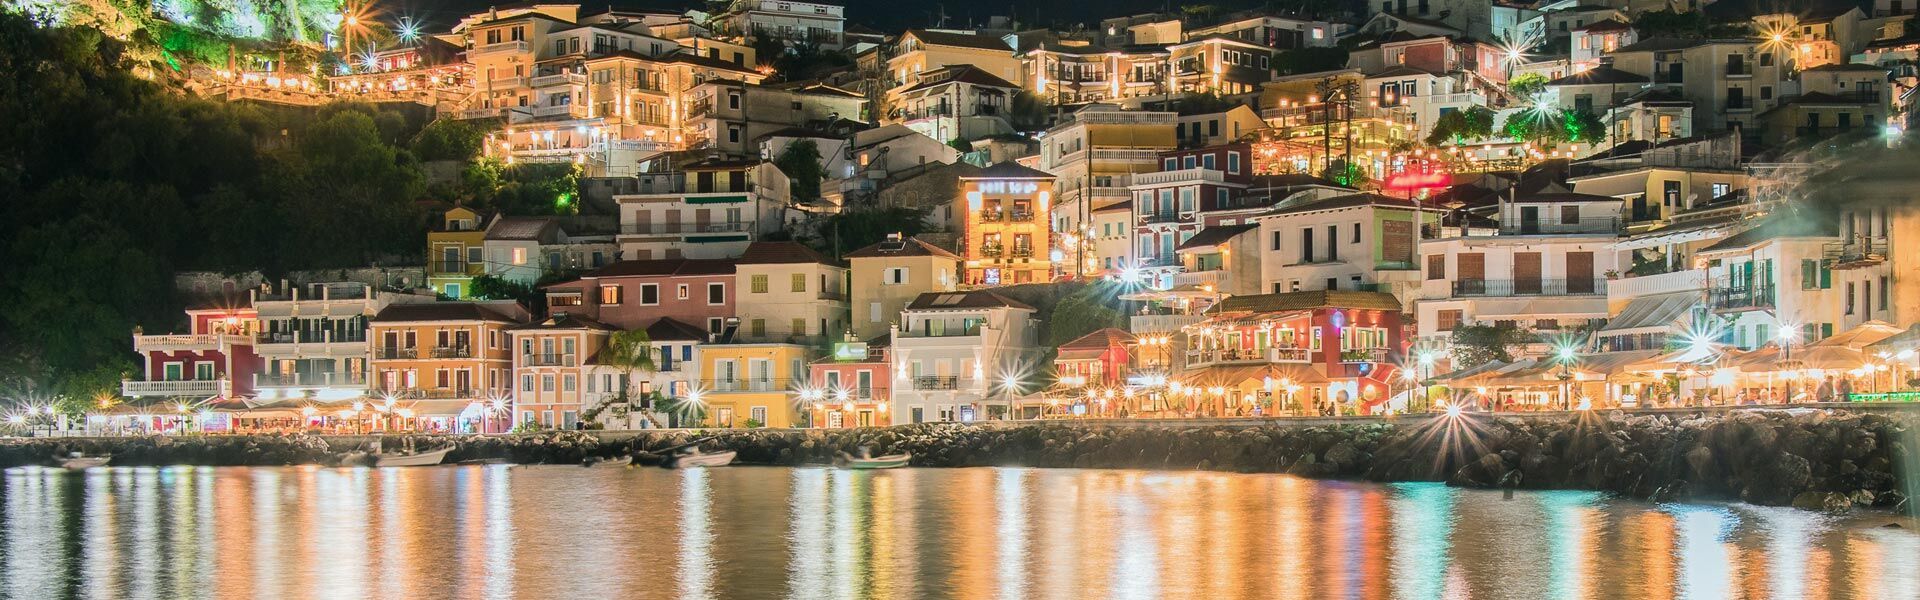 Looking across the bay towards traditional houses and Parga's castle, during the night